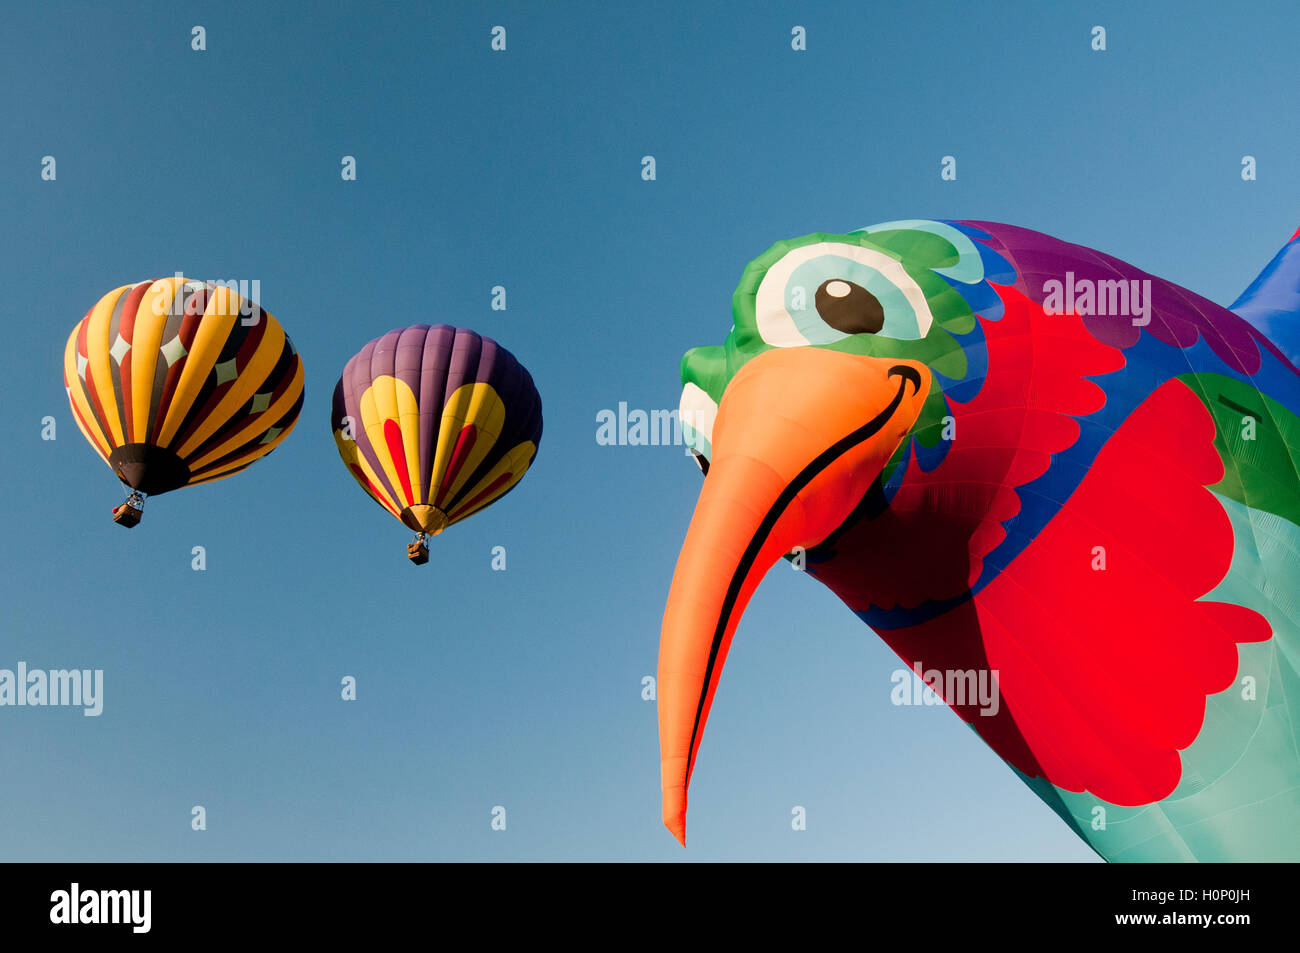 Hummingbird-shaped hot air balloon and two other balloons at the 'Spirit of Boise Balloon Classic 2016' in Boise ID 2016 Stock Photo